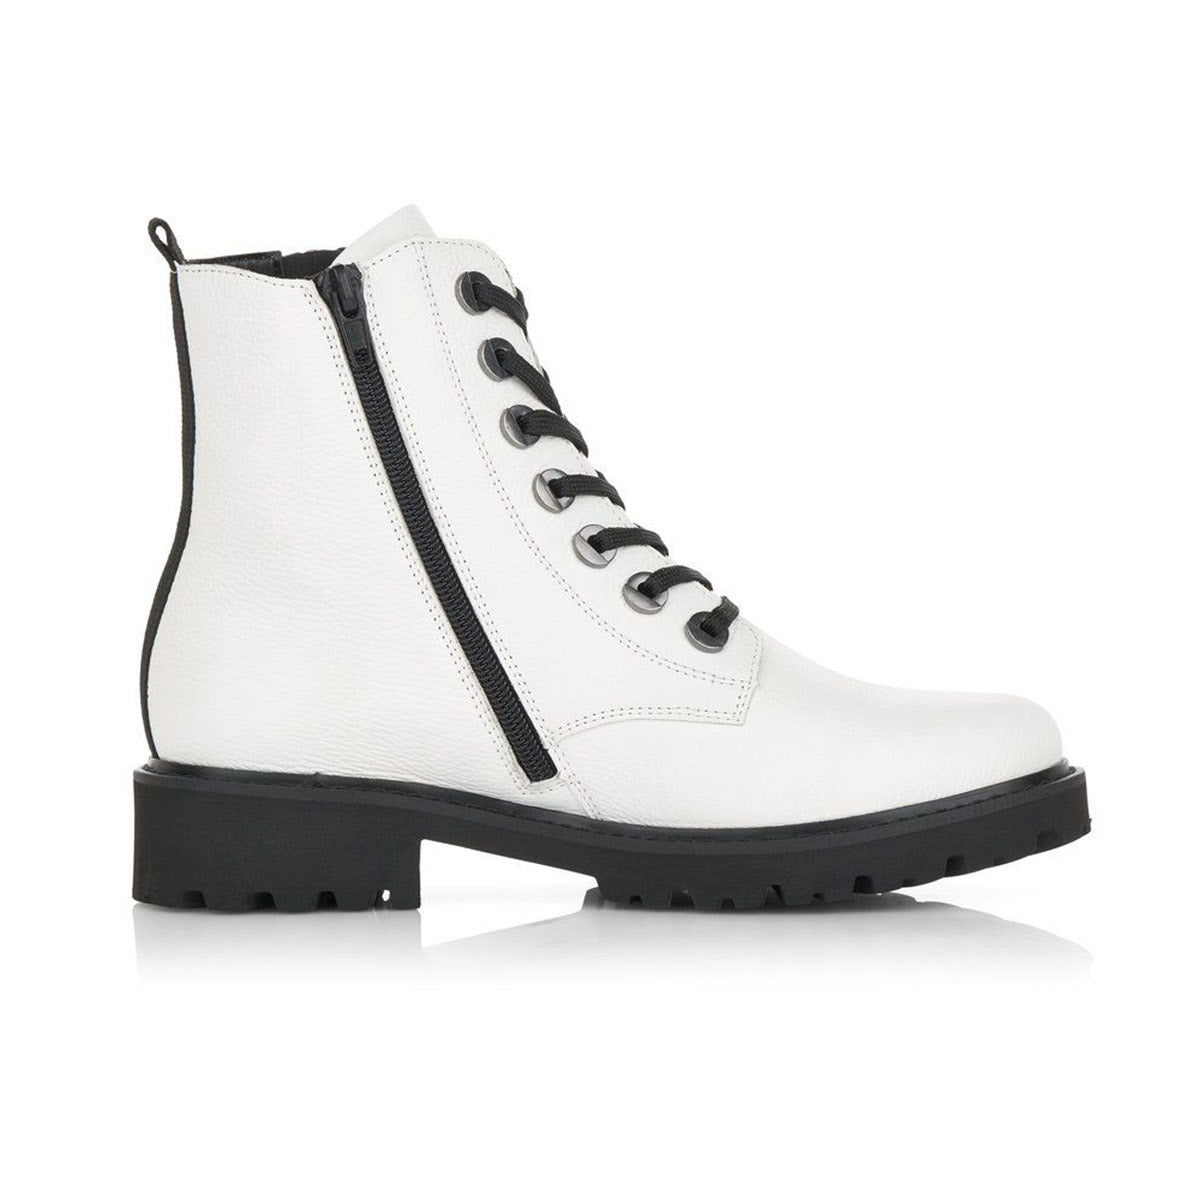 White lace-up ankle boot with black sole and zipper detail, featuring Remonte D8671 lace type closure, the REMONTE D8671 BOOT WHITE - WOMENS.